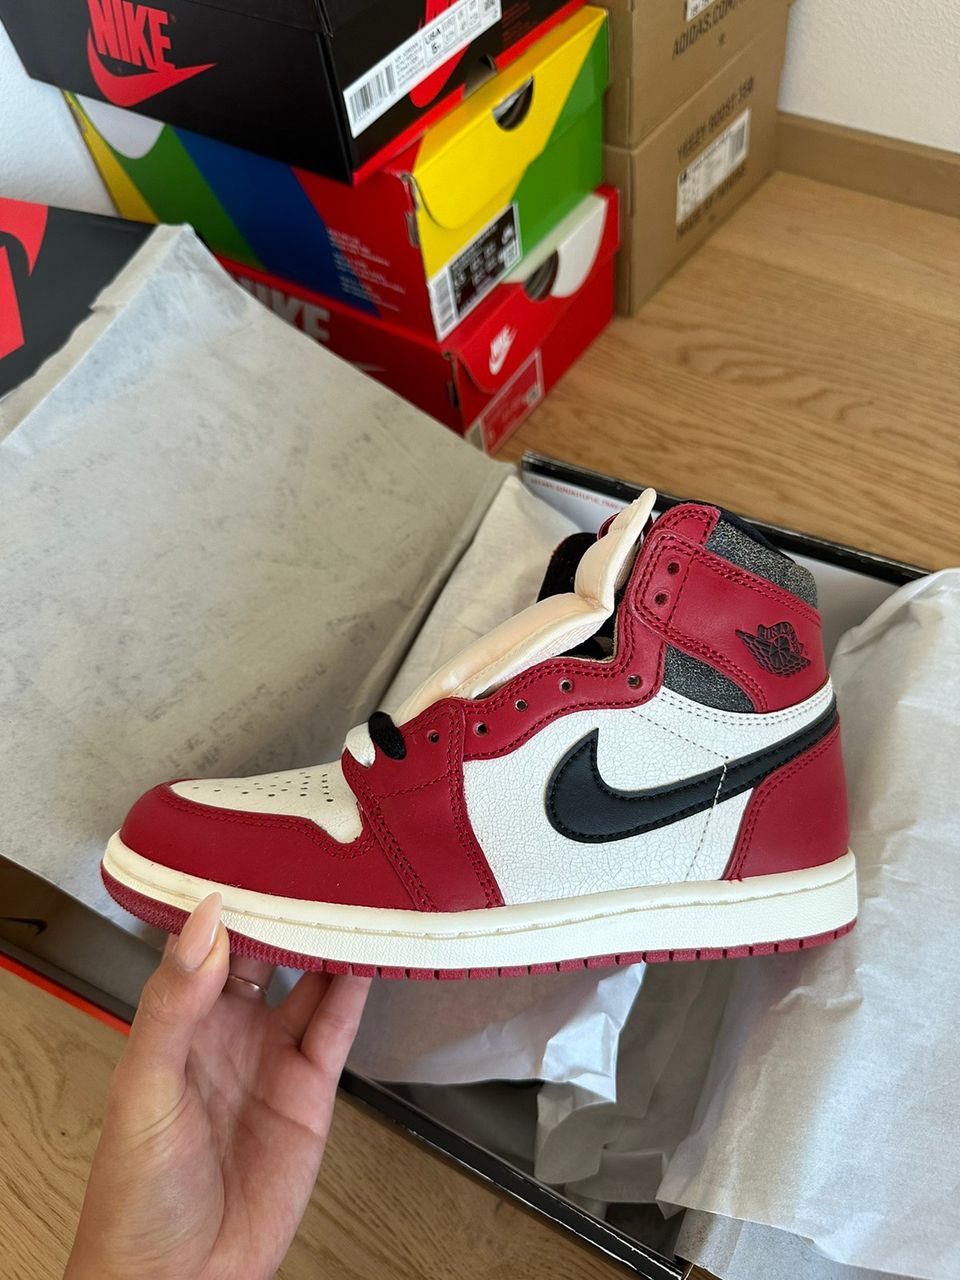 Nike Air Jordan 1 Retro High OG, chicago lost and found